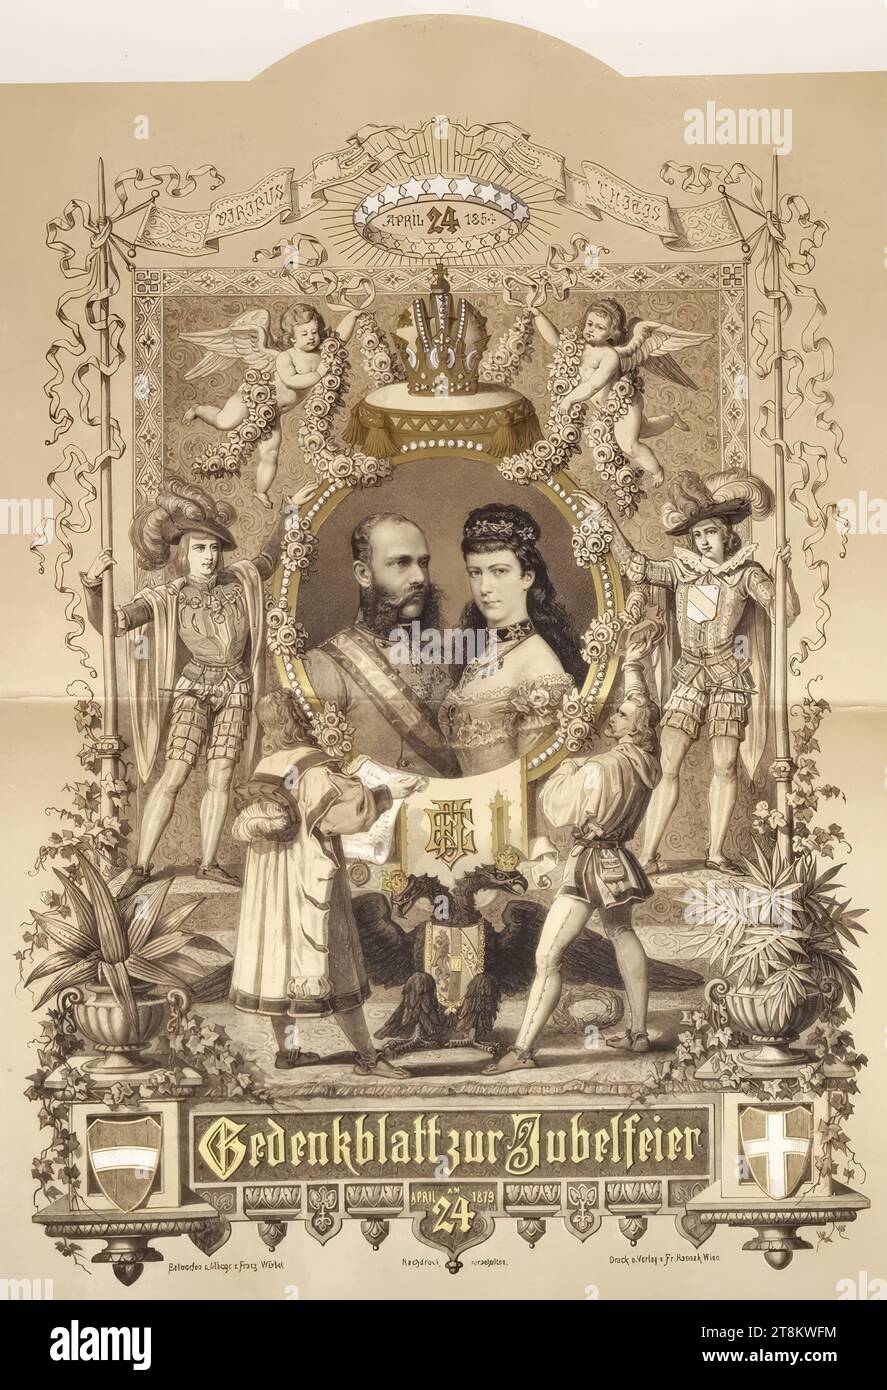 Commemorative sheet for the Silver Wedding of Emperor Franz Joseph I and Empress Elisabeth of Austria on April 24, 1879, 1879, print, lithograph with three clay plates, gold print and white recesses, on paper, sheet: 84.1 × 62.2 cm, [M.u. ] 'Reprint reserved', below the illustration, within the sound record, [M.u.] 'His apostol. Dedicated to His Majesty the Emperor and King Franz Josef 1. in deepest reverence by, Friedrich Hannak.', below the clay plate, in gold print Stock Photo